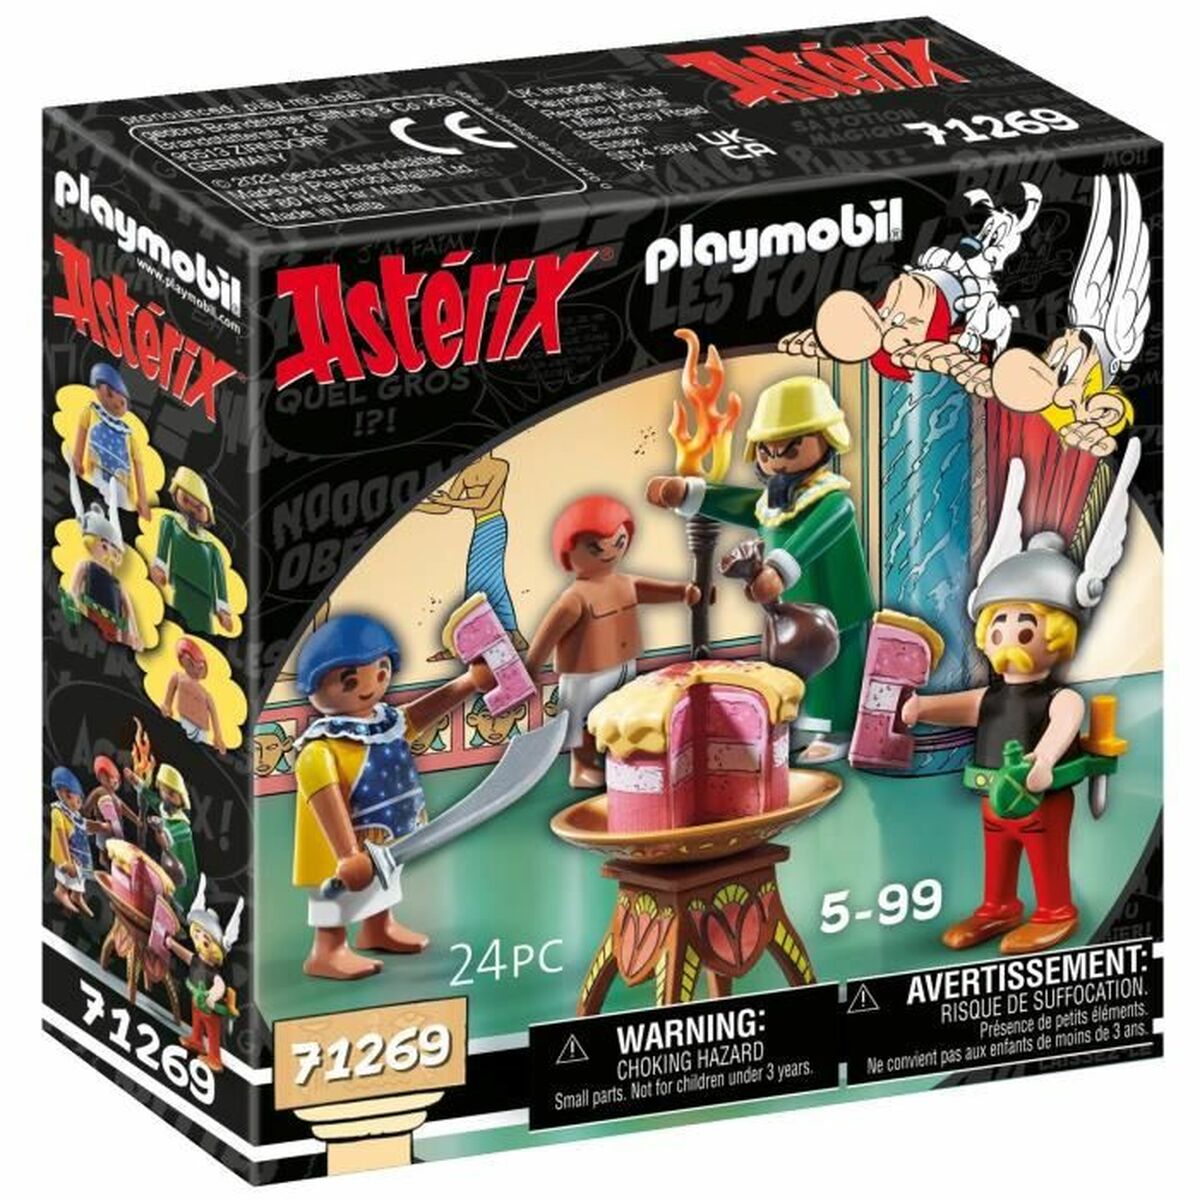 Playset Playmobil Asterix: Amonbofis and the poisoned cake 71268 24 Pezzi - Disponibile in 3-4 giorni lavorativi